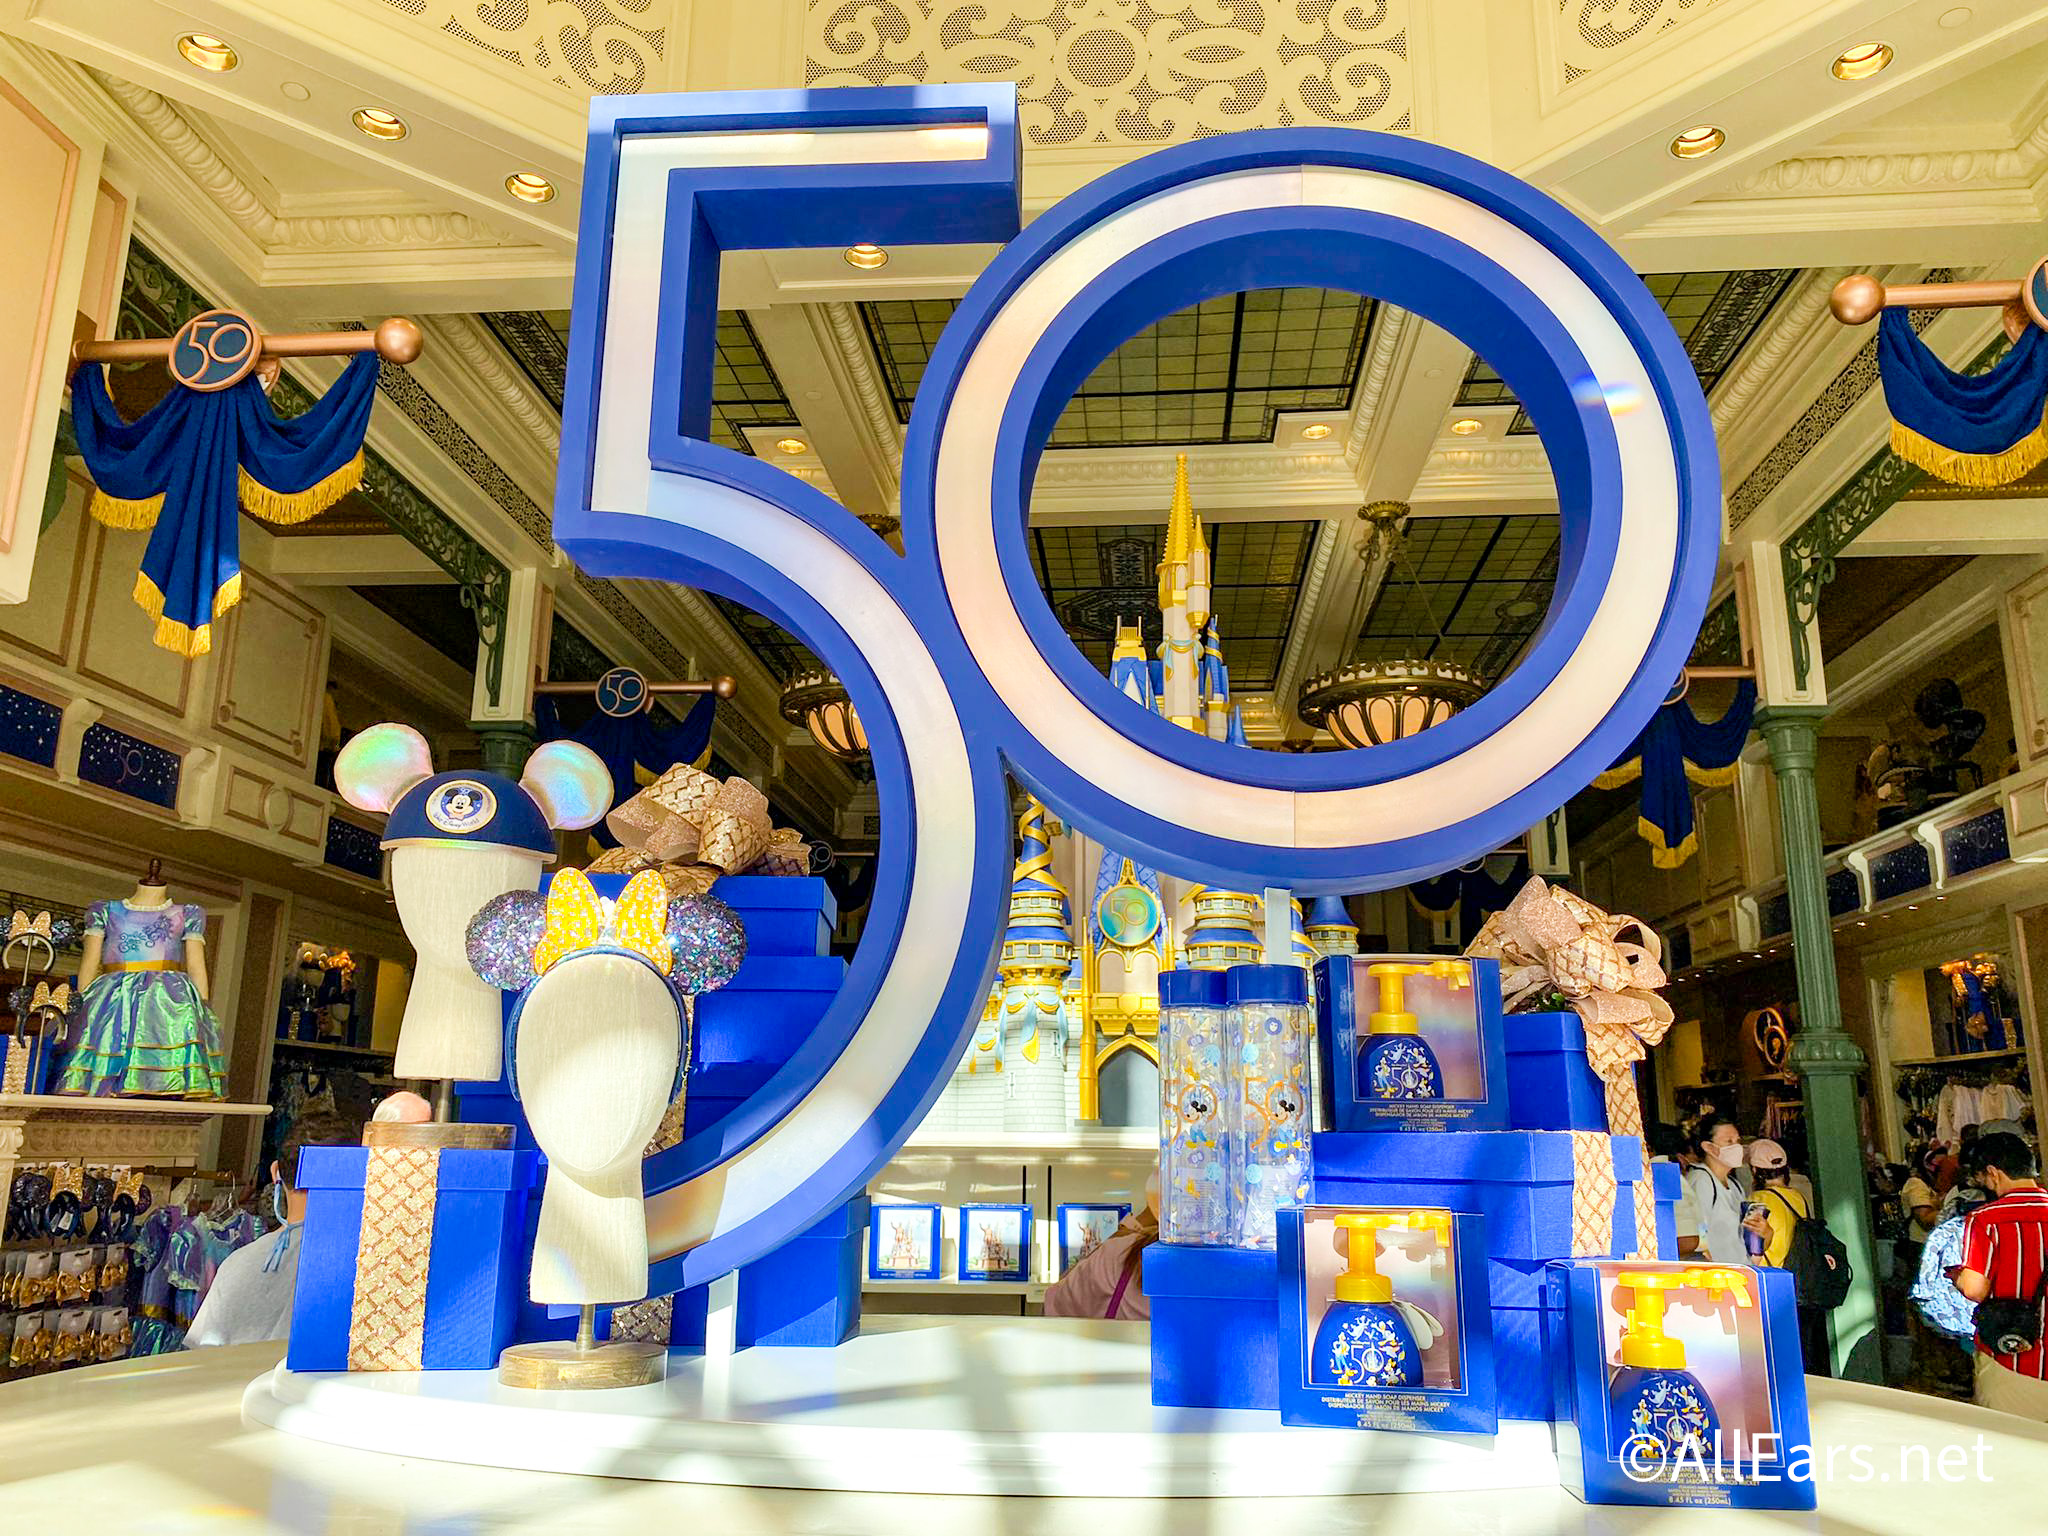 All of the Disney World 50th Anniversary Merchandise You Can Find